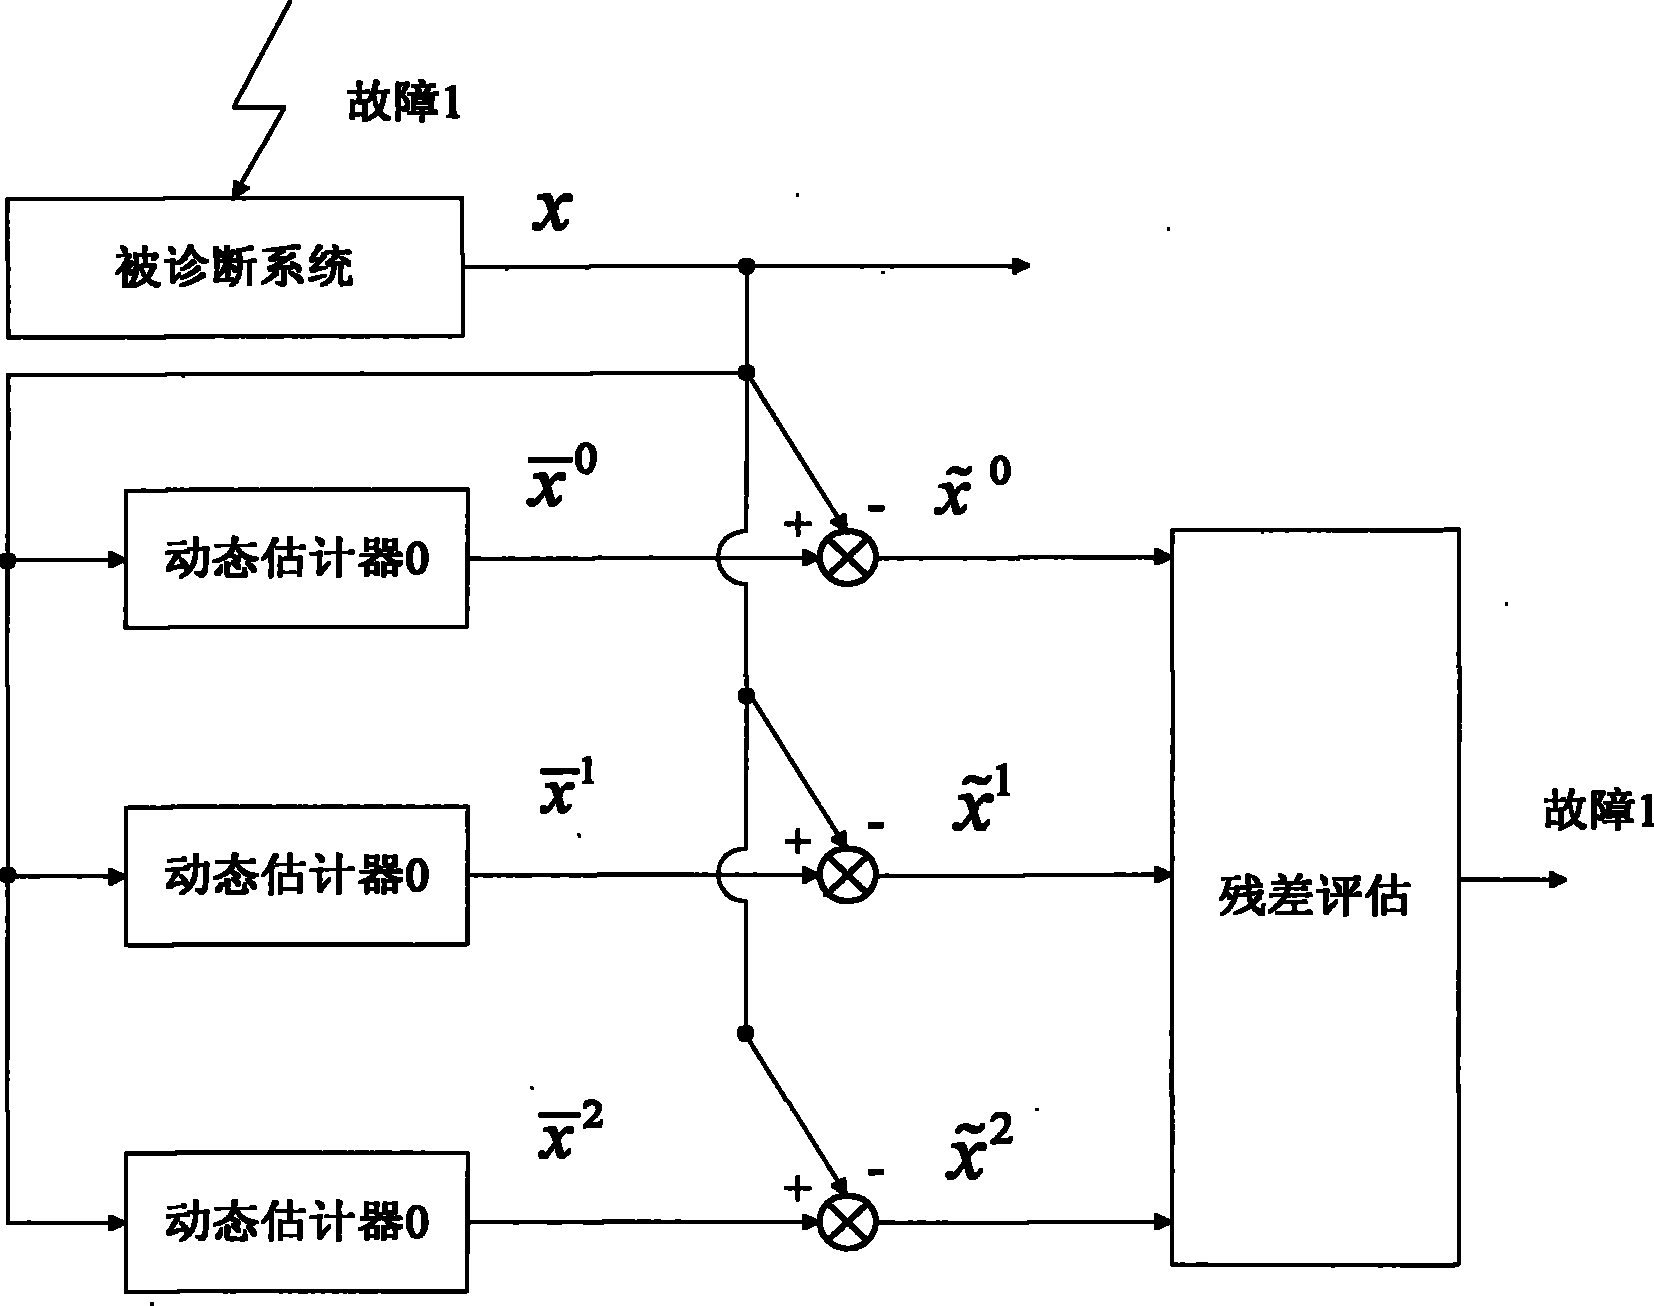 Vibrating failure diagnosis method based on determined learning theory